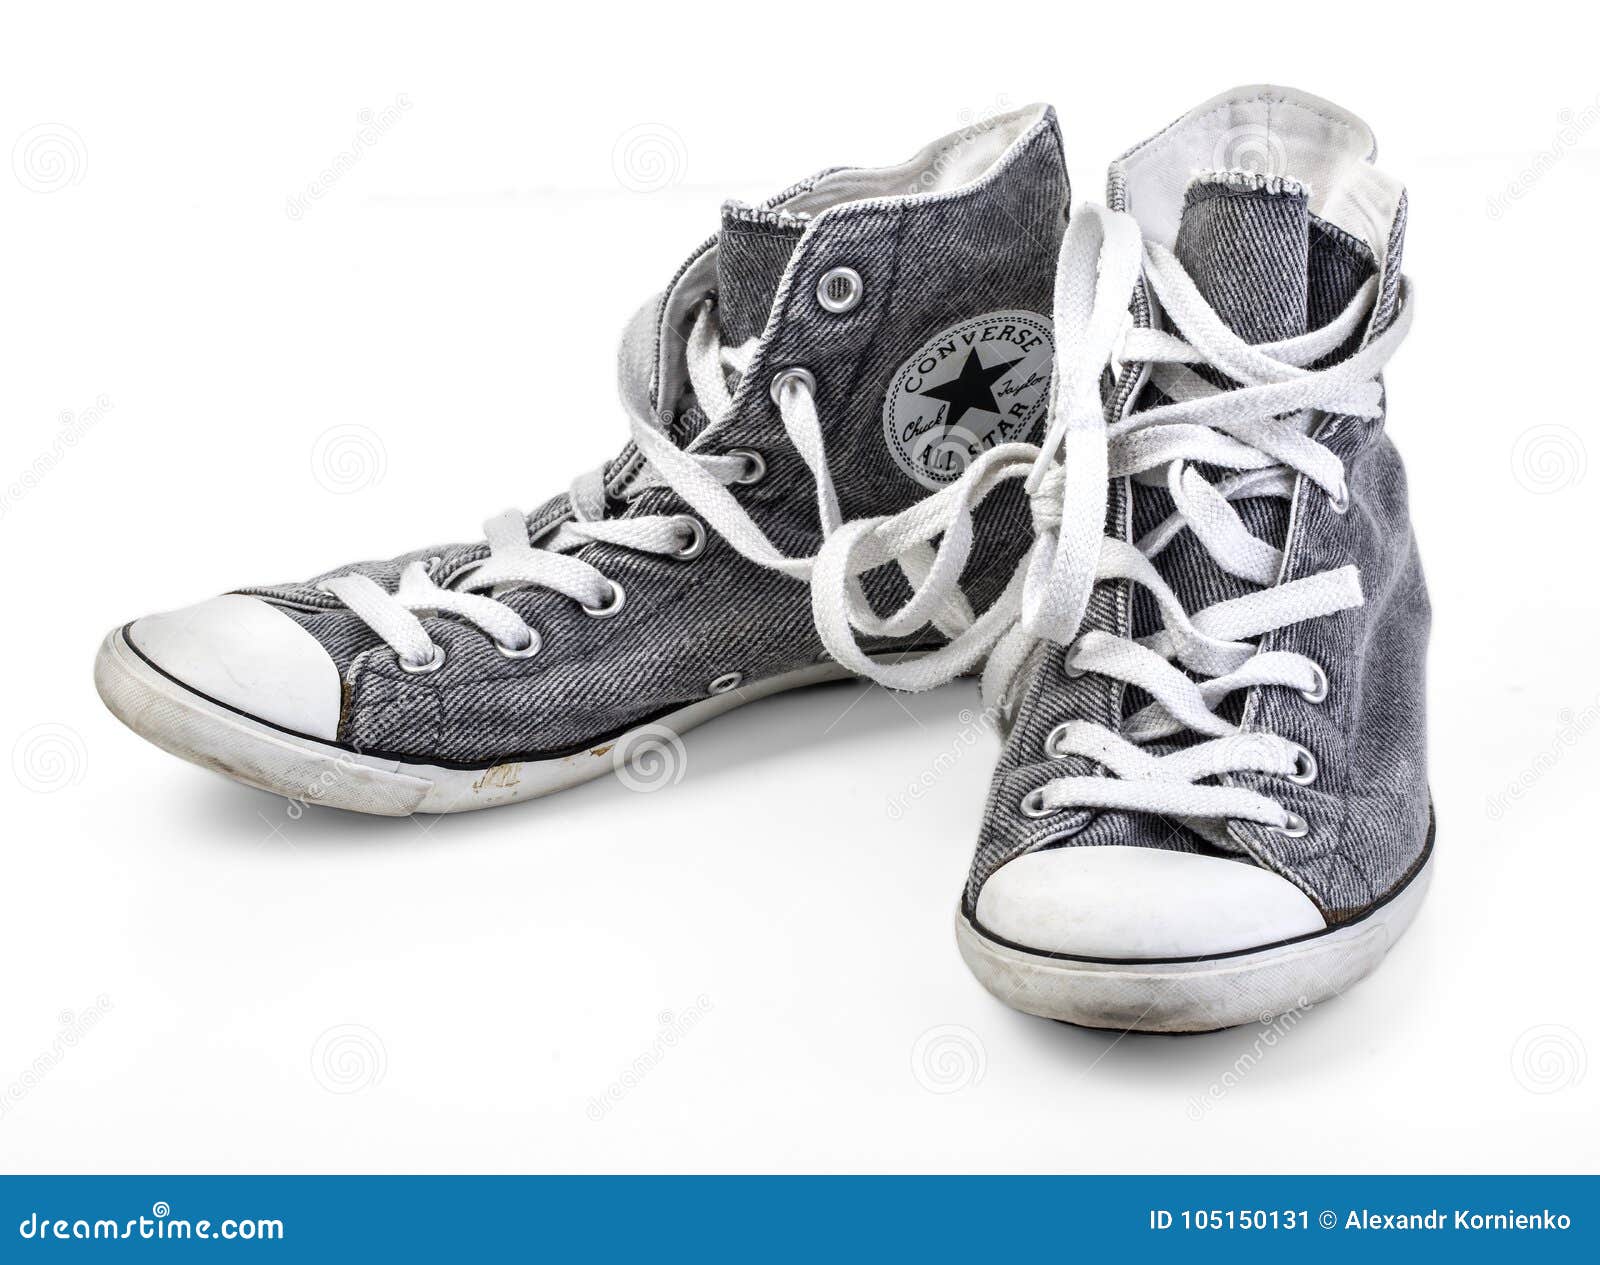 Converse Shoes Isolated on White Editorial Photo - Image of grunge ...